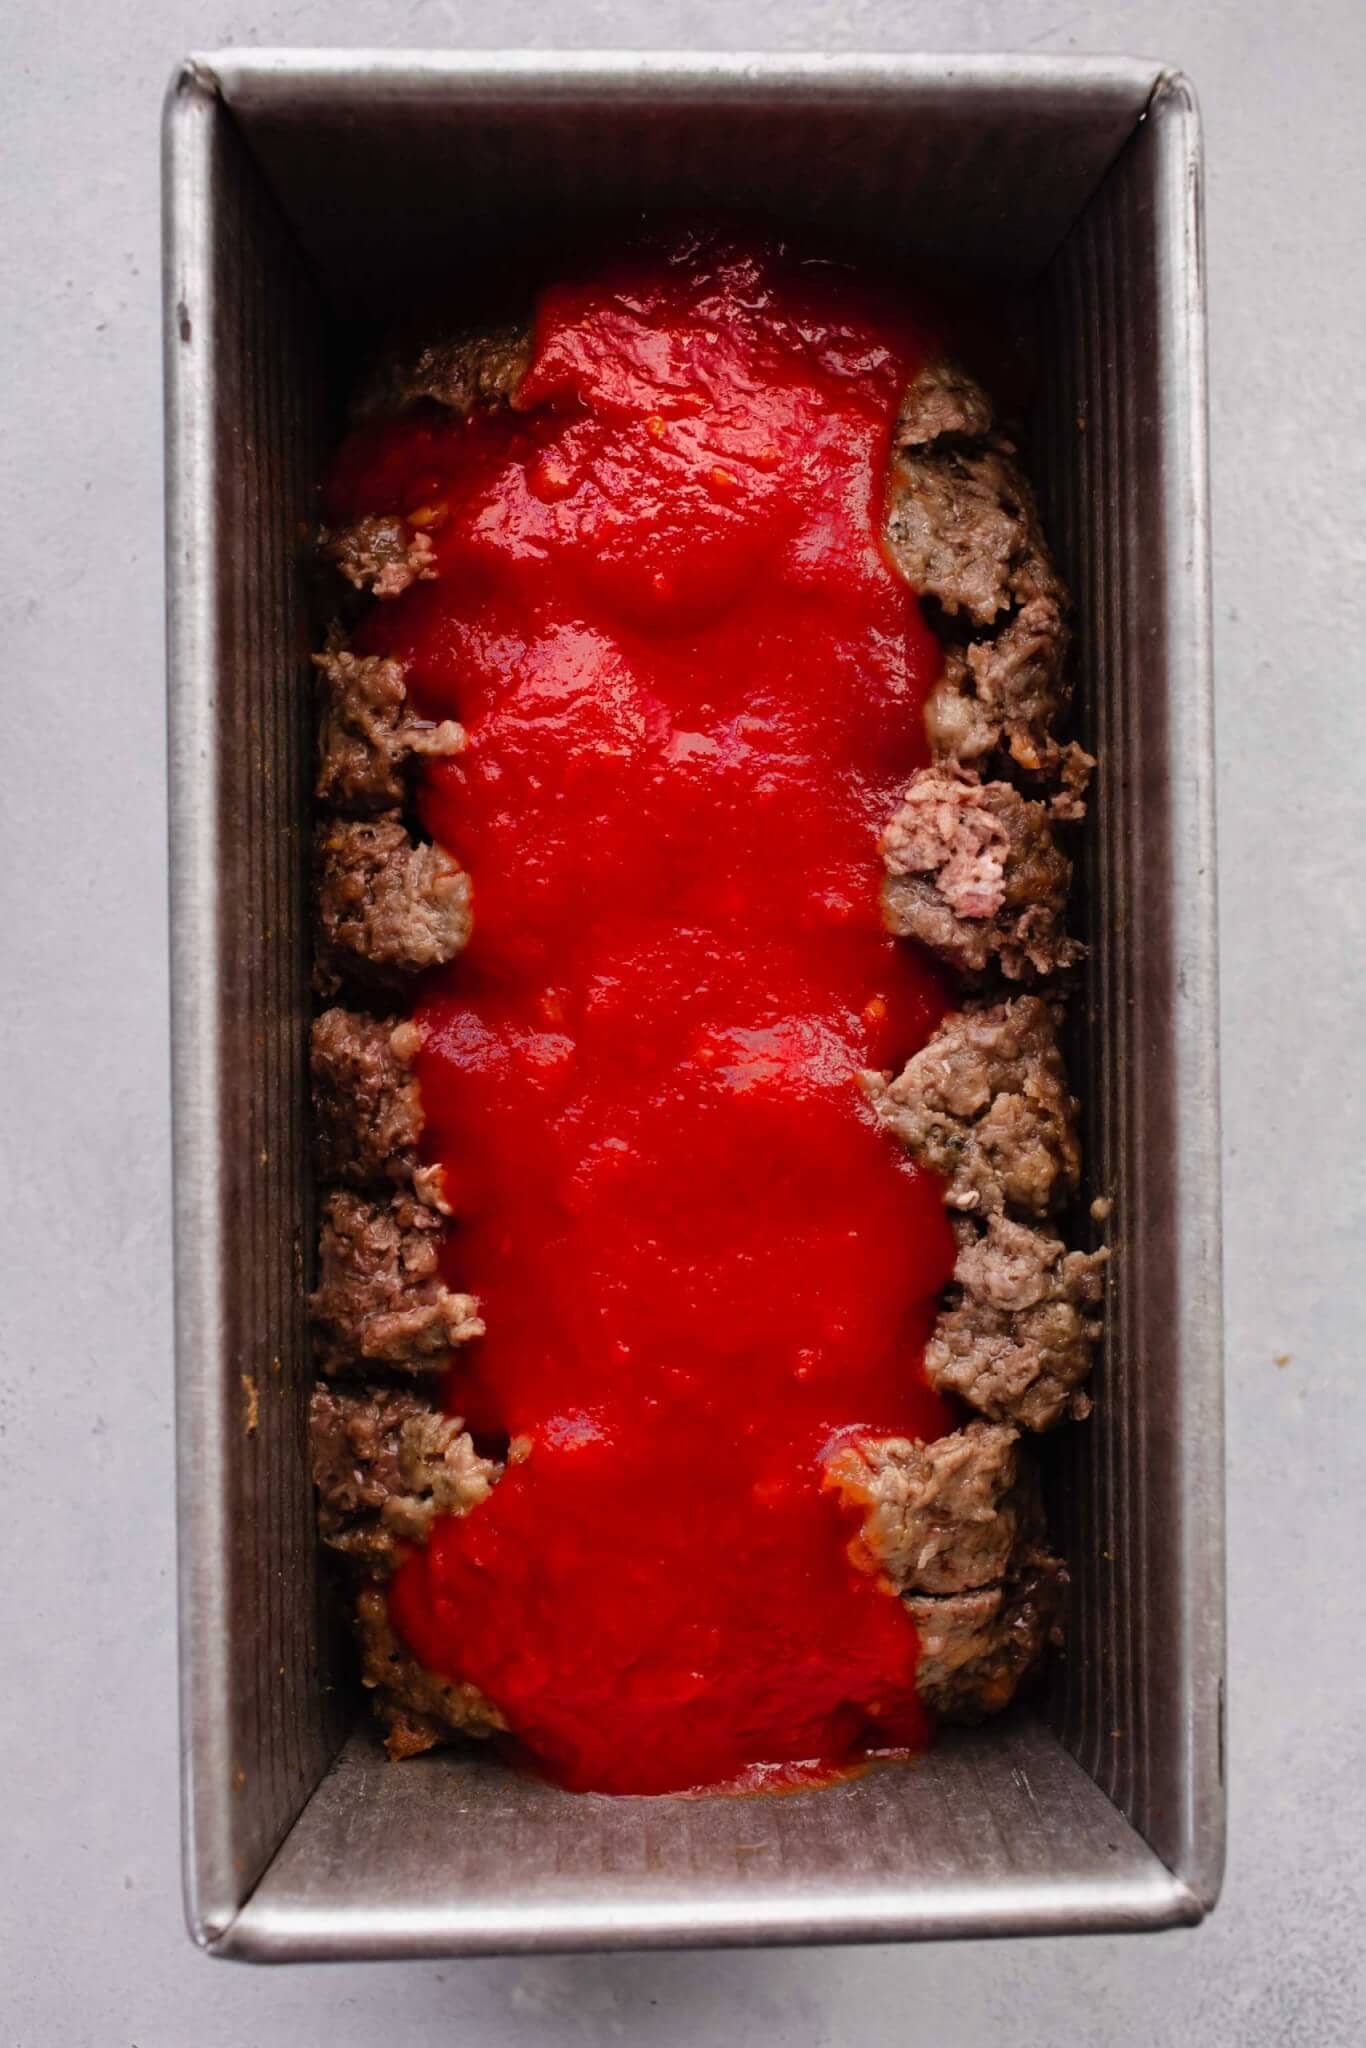 Half baked meatloaf after slicing and drizzling on tomato sauce.